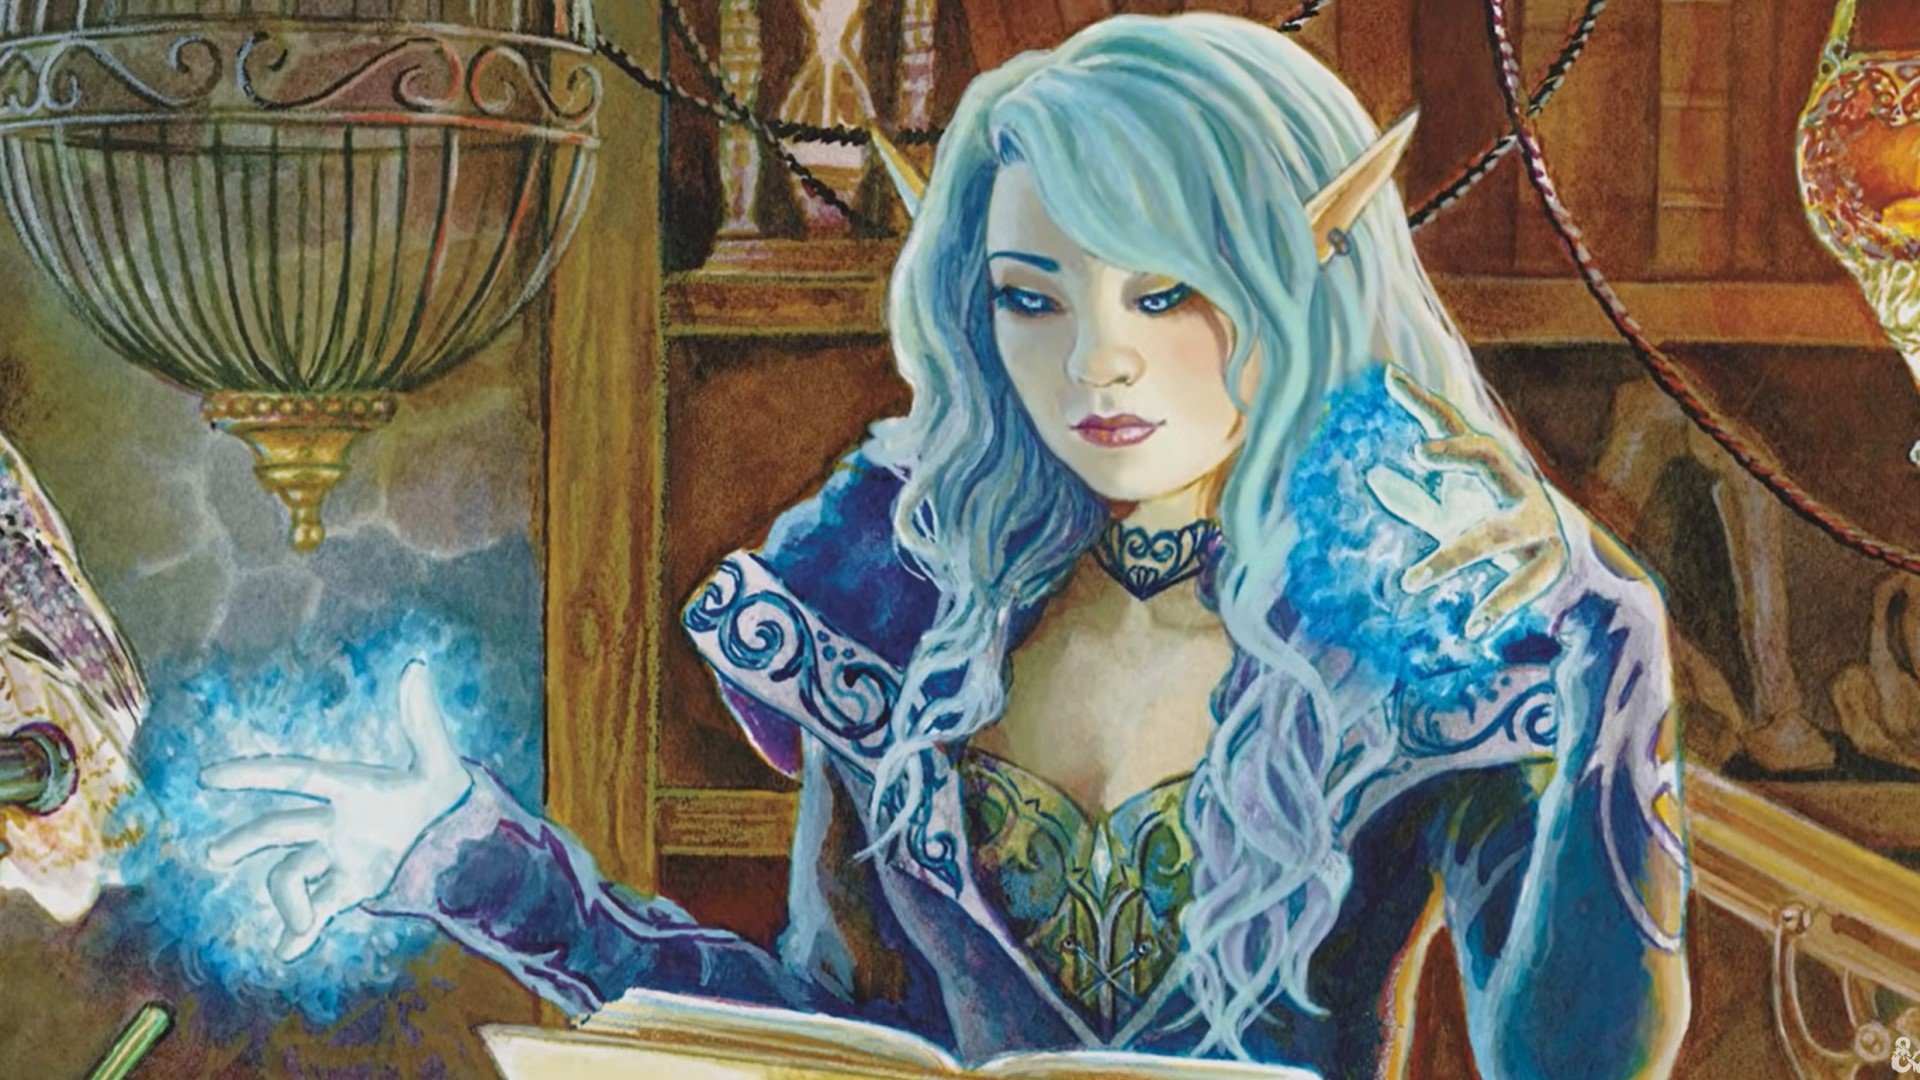 DnD Detect Thoughts 5e - Wizards of the Coast art of an elf wizard with long blue hair